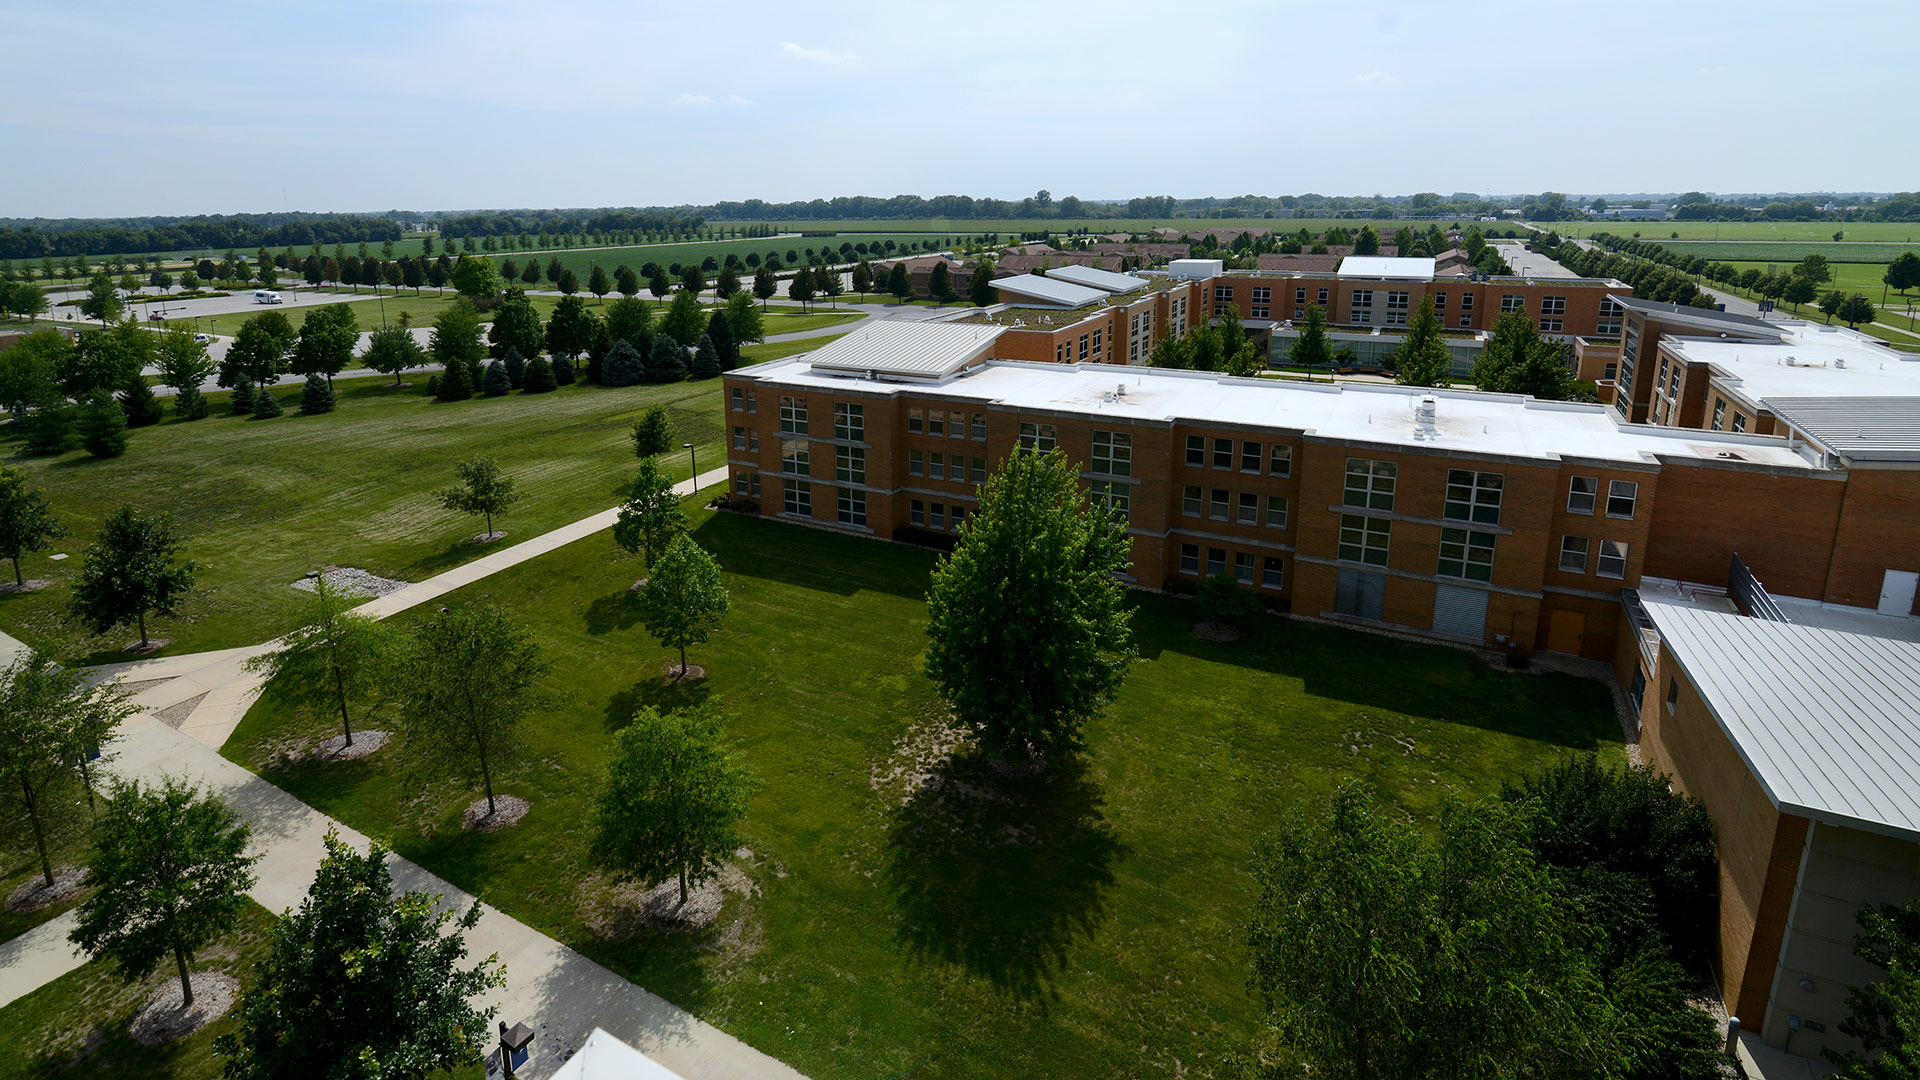 Illinois State University To Close Dorms, Shift To Online Classes